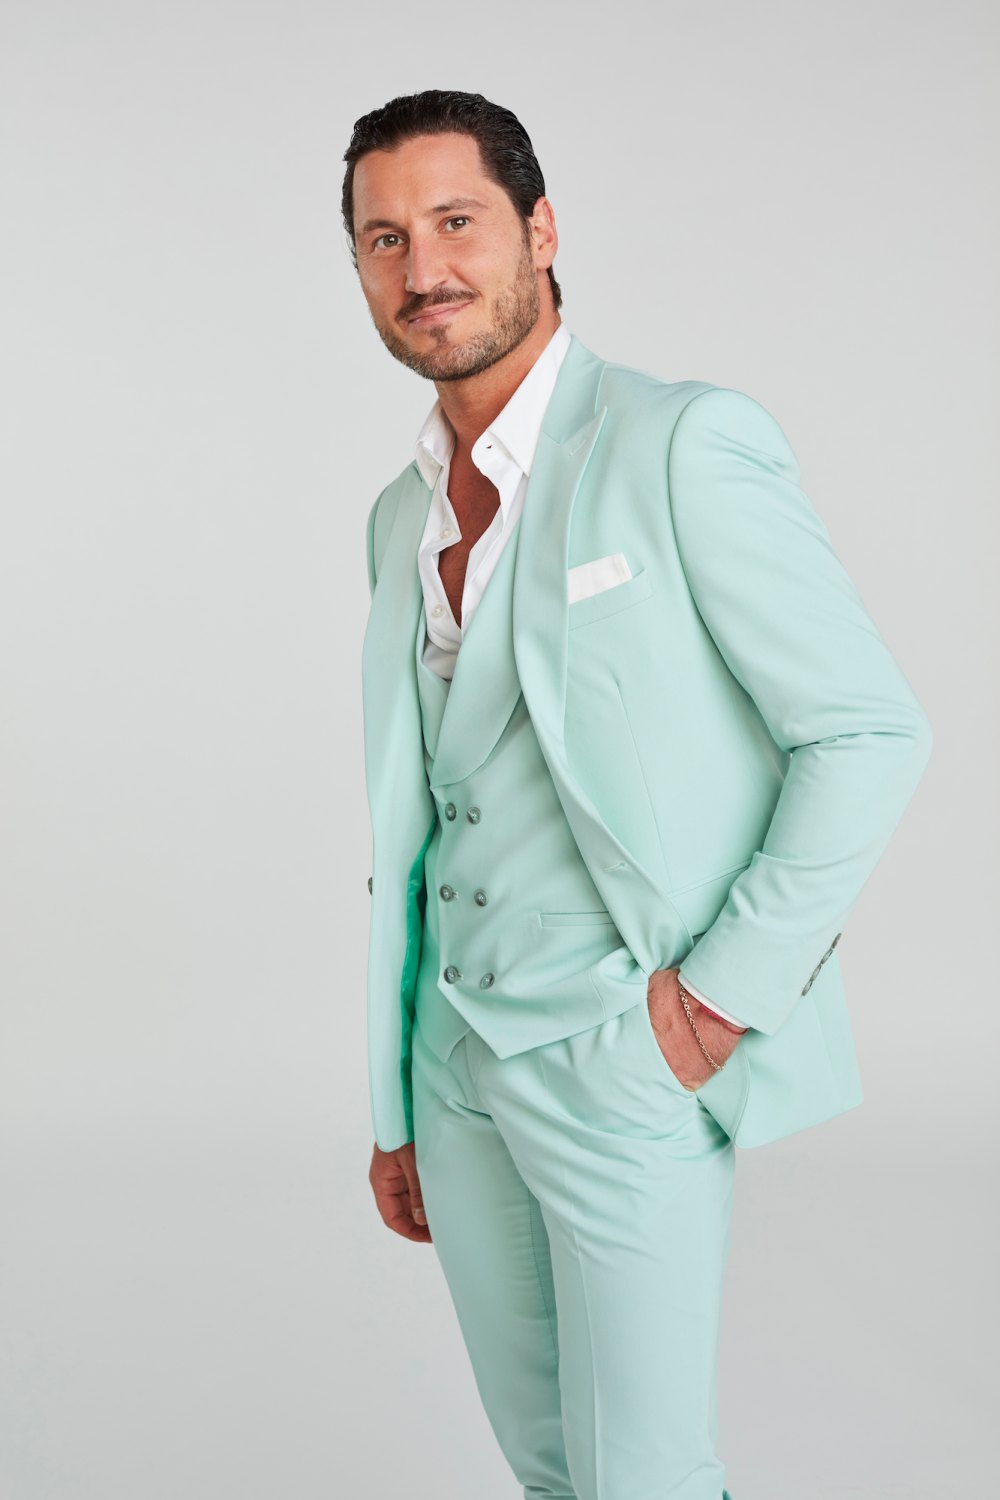 Val Chmerkovskiy Discusses His Future After 'DWTS' Season 30